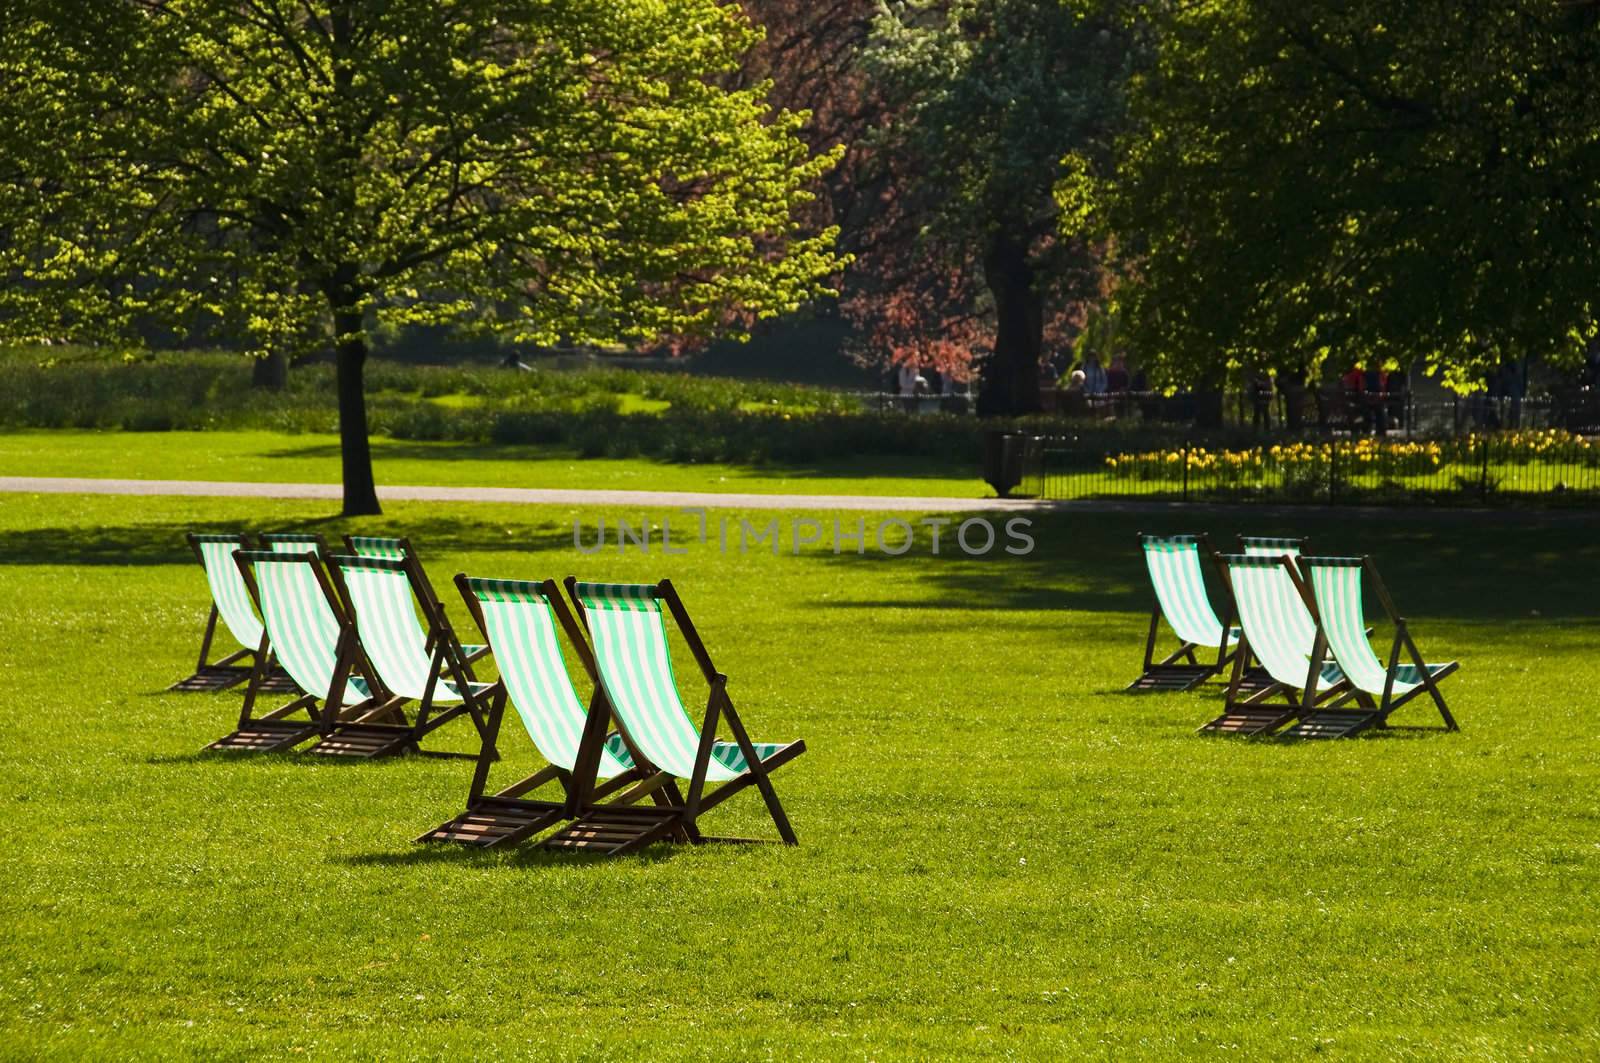 Deck chairs in a park by dutourdumonde